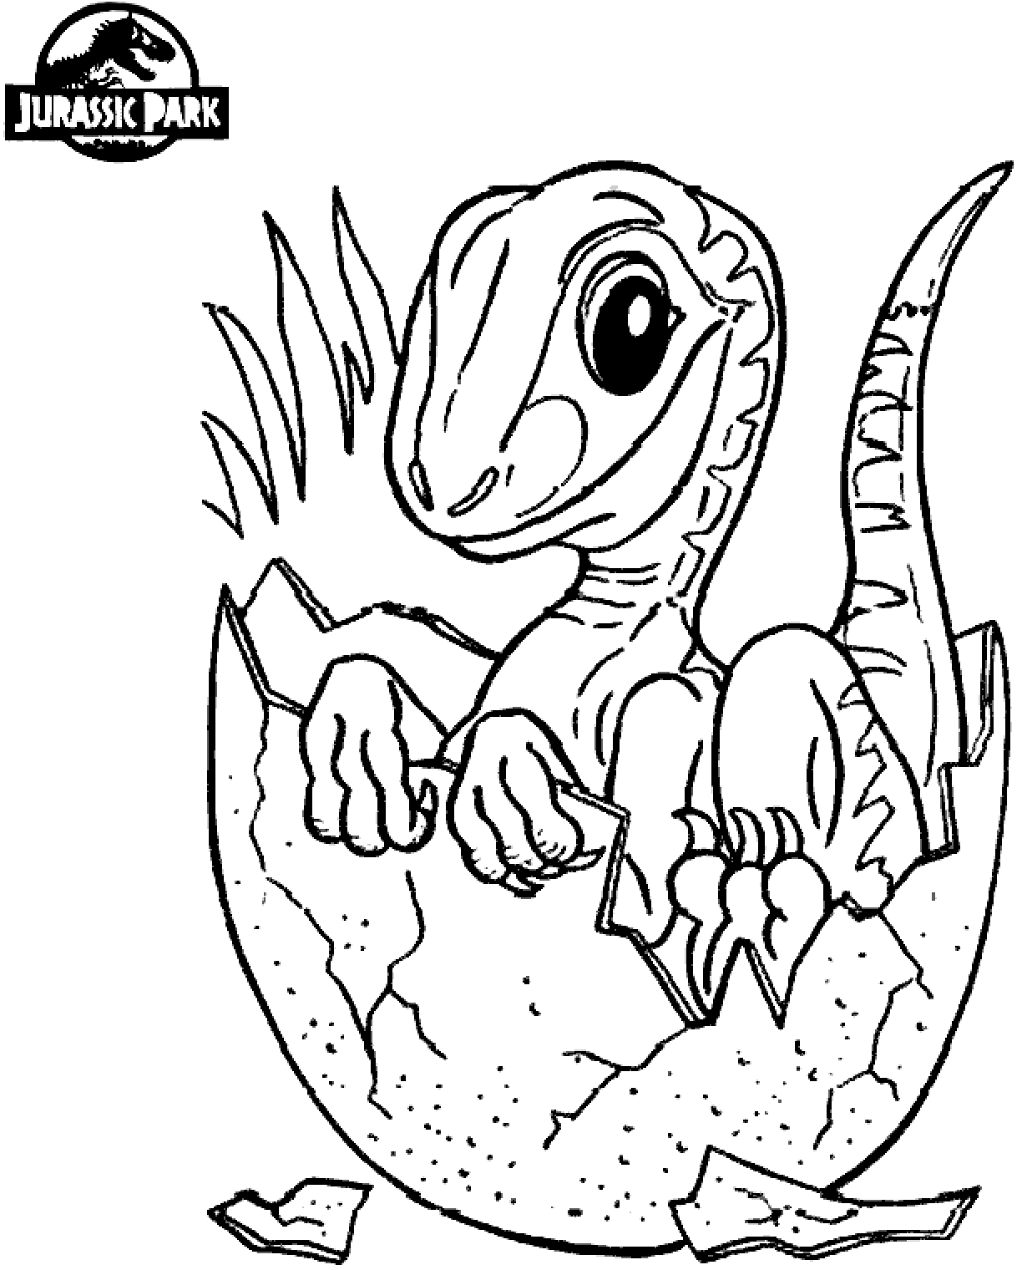 Baby Dinosaur In Jurassic World Coloring Page Free Printable Coloring 